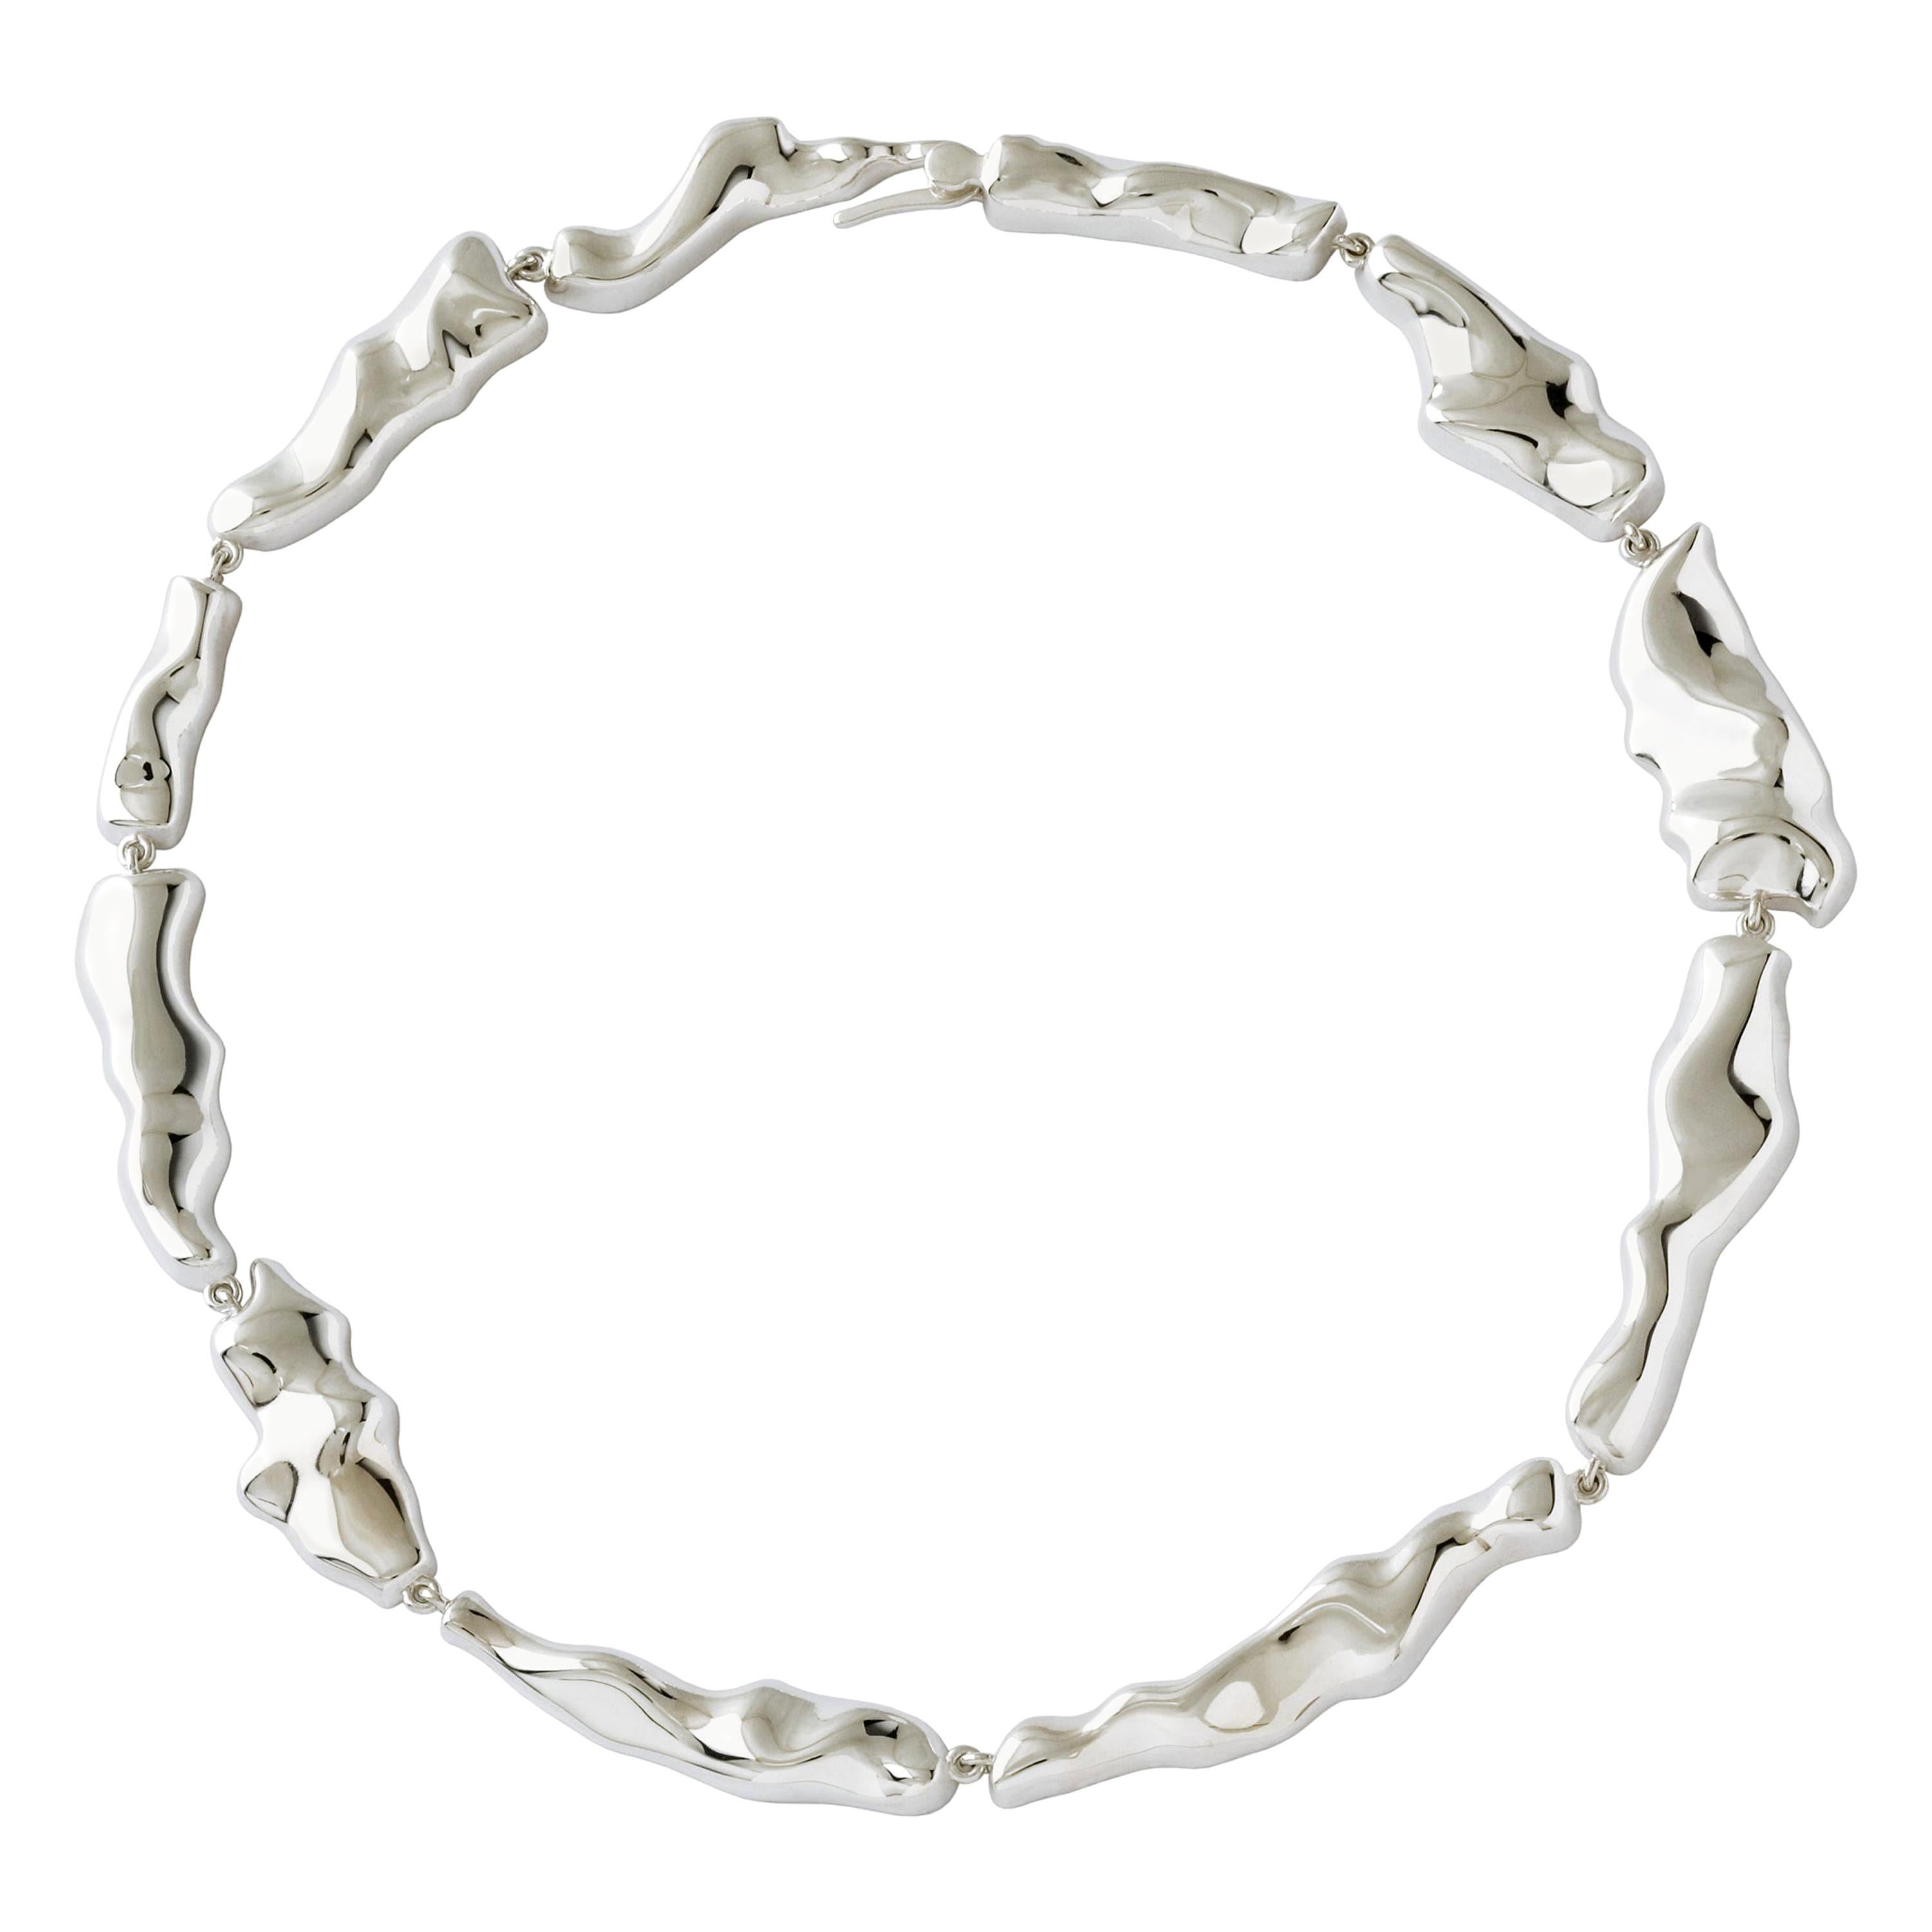 Nathalie Jean Contemporary Rhodium-Plated Sterling Silver Link Choker Necklace